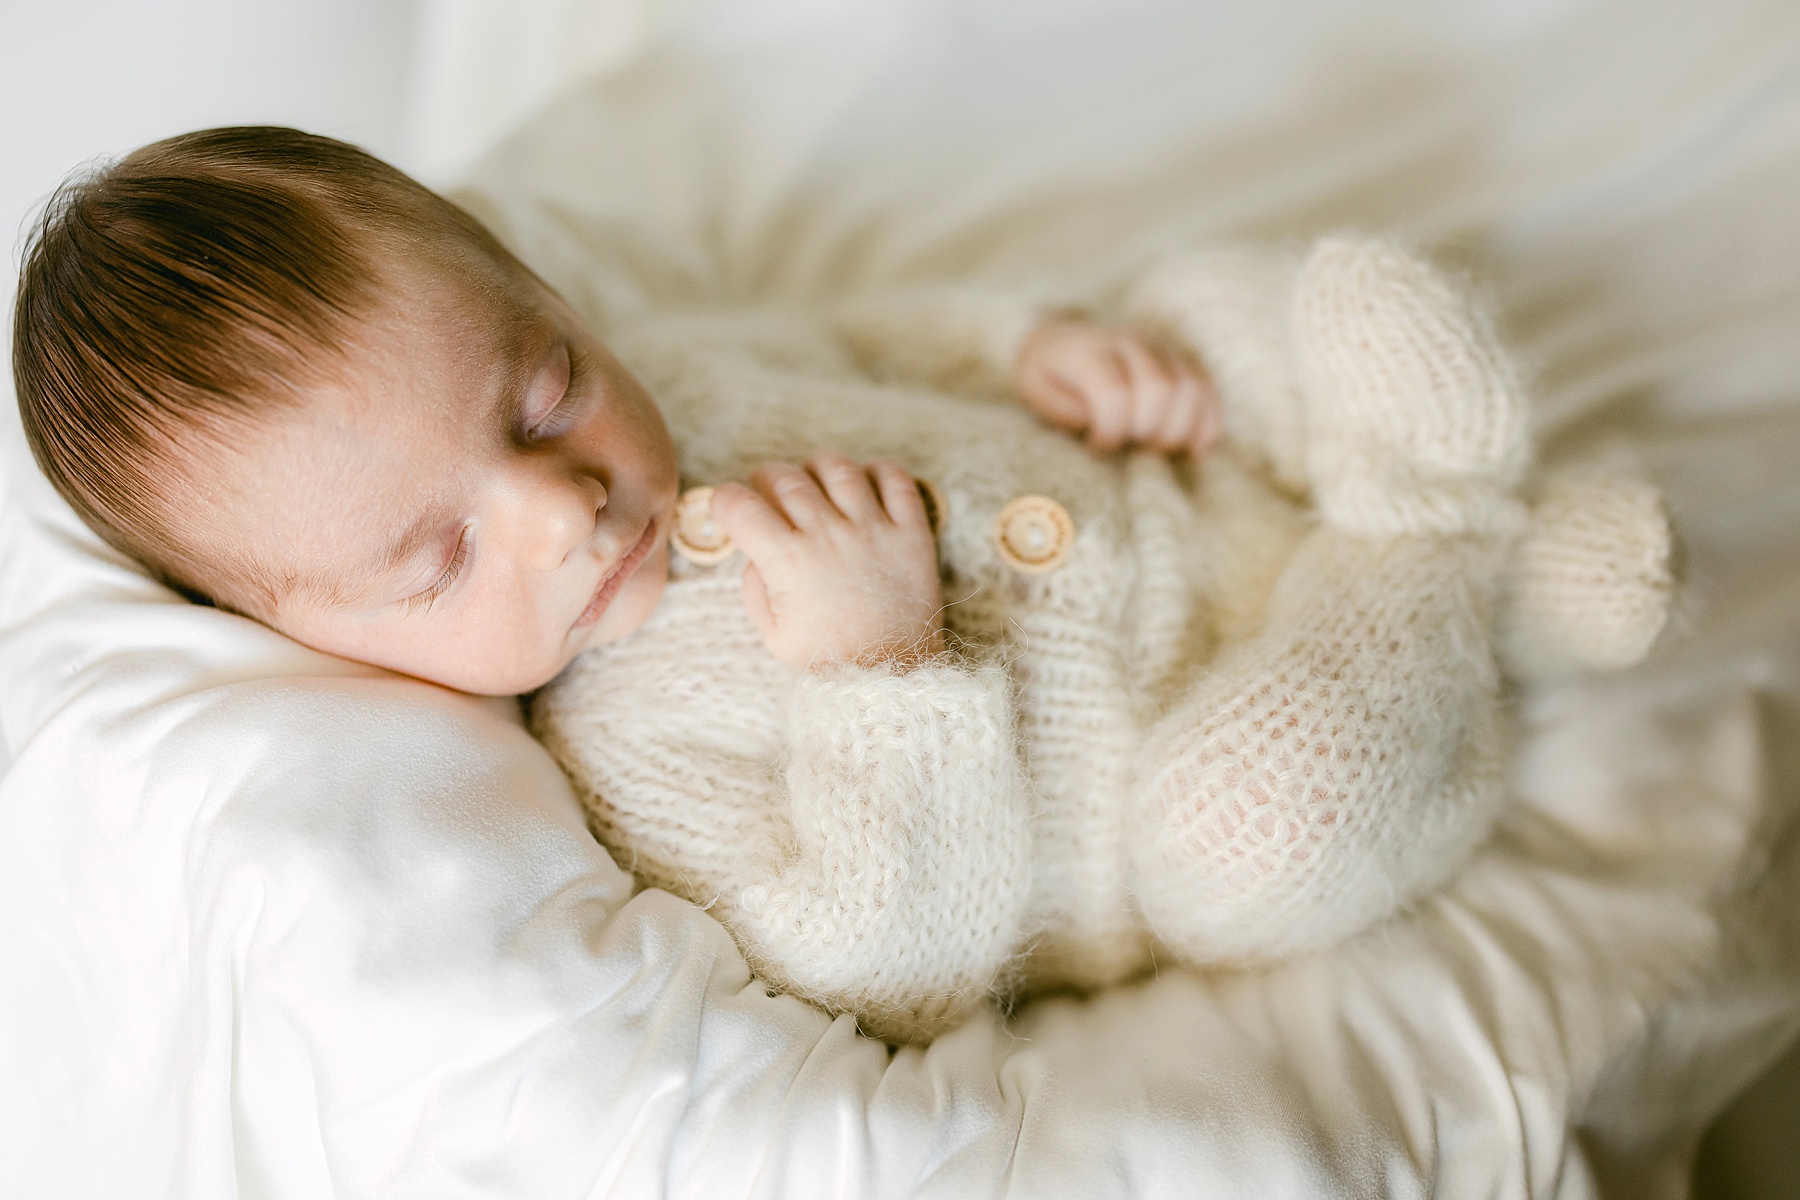 newborn baby wearing a wool outfit sleeping in bucket with white blankets